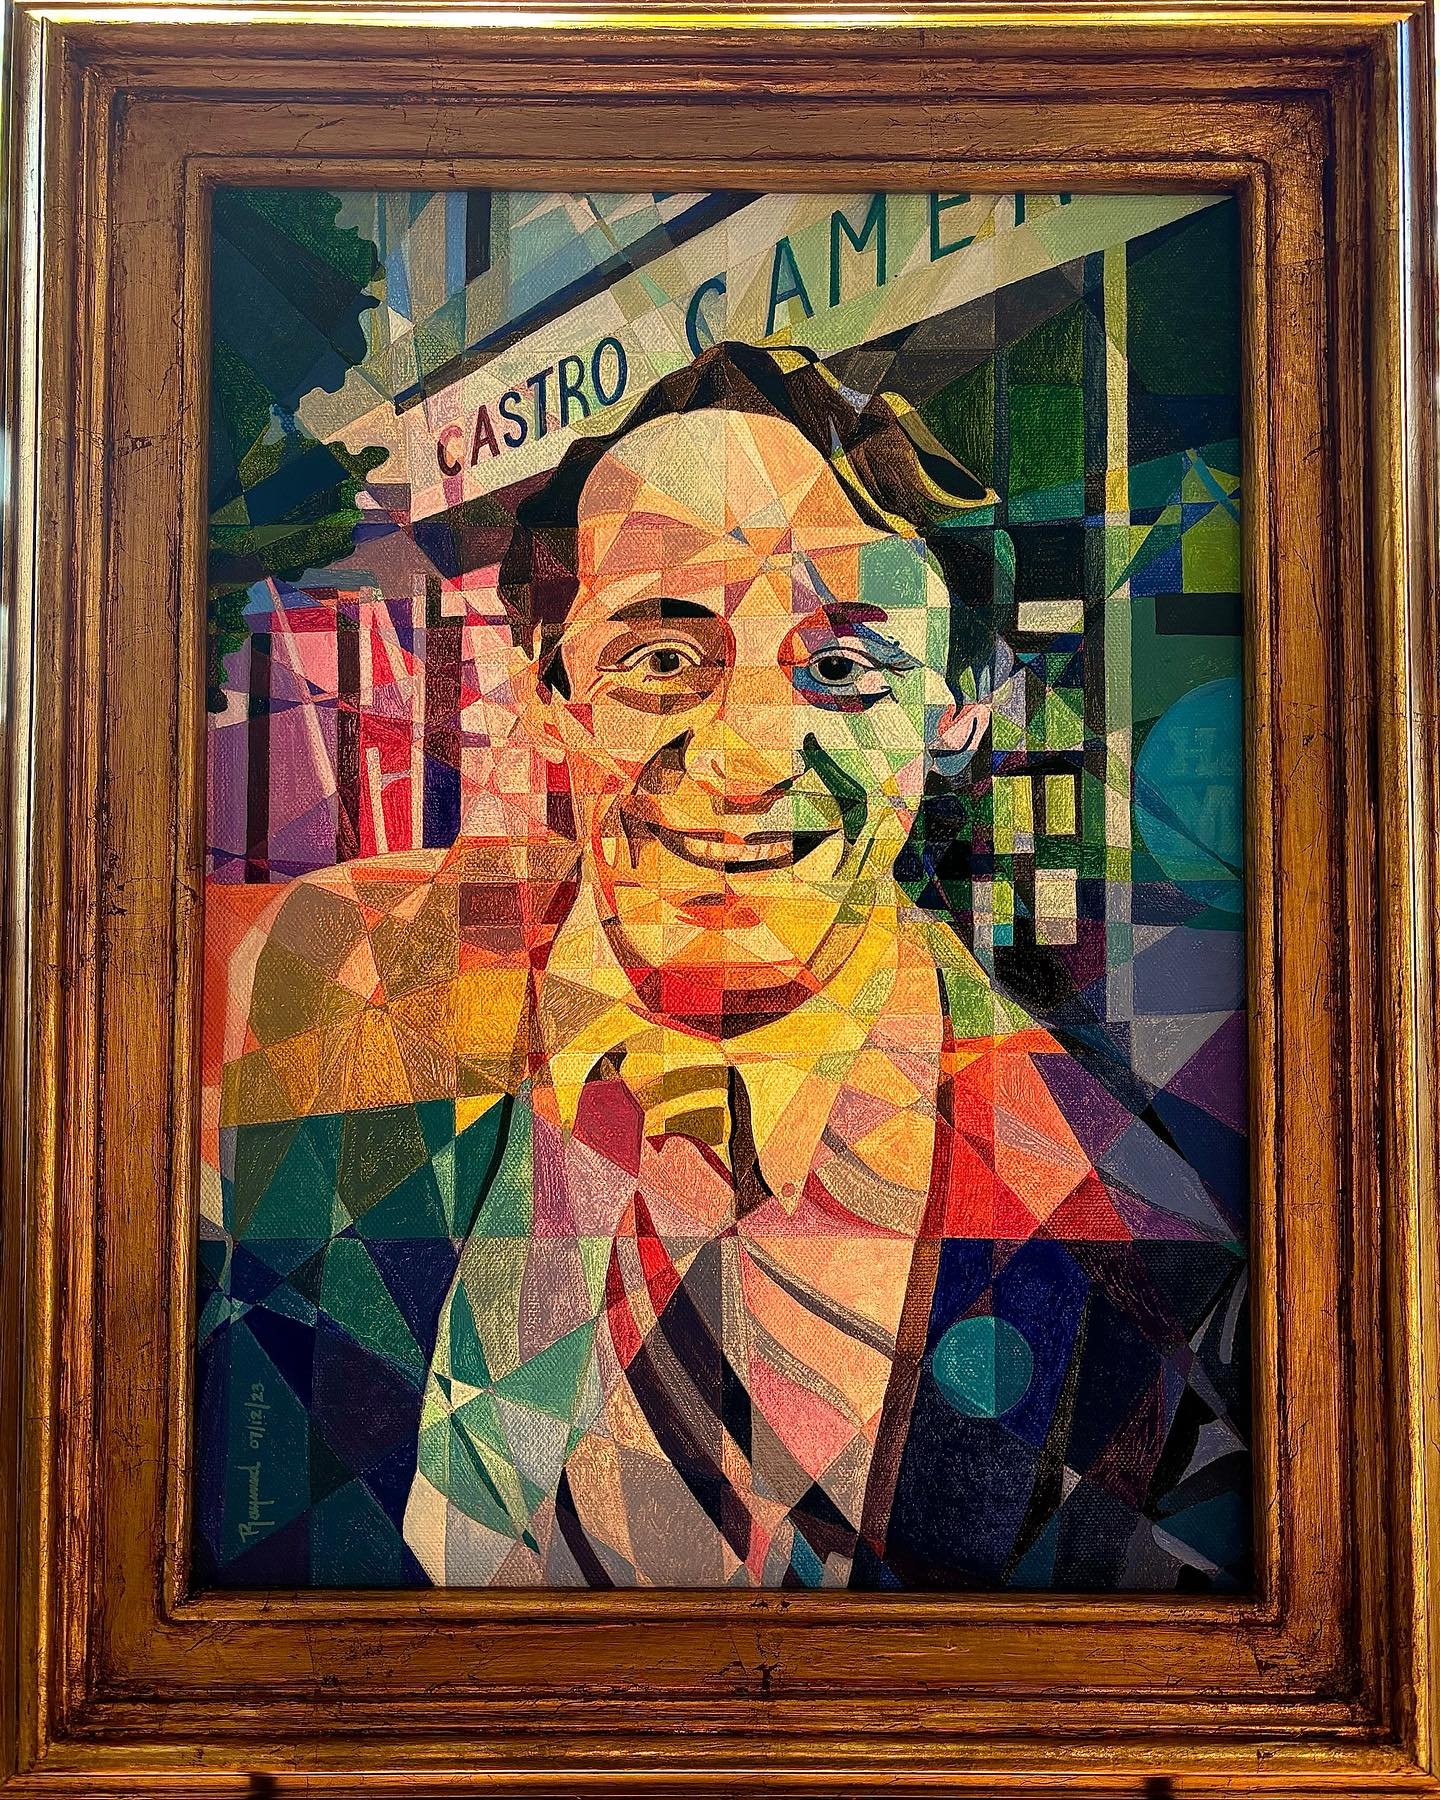 To celebrate Harvey Milk Day on the 22nd, we are displaying @raymundovaldezartist &lsquo;s original Harvey painting and selling prints of this incredible piece! 
✨🌈✨🌈✨🌈✨🌈✨🌈✨🌈✨🌈✨🌈
In addition to that, @castrolgbtq , @castromerchants , @harveym